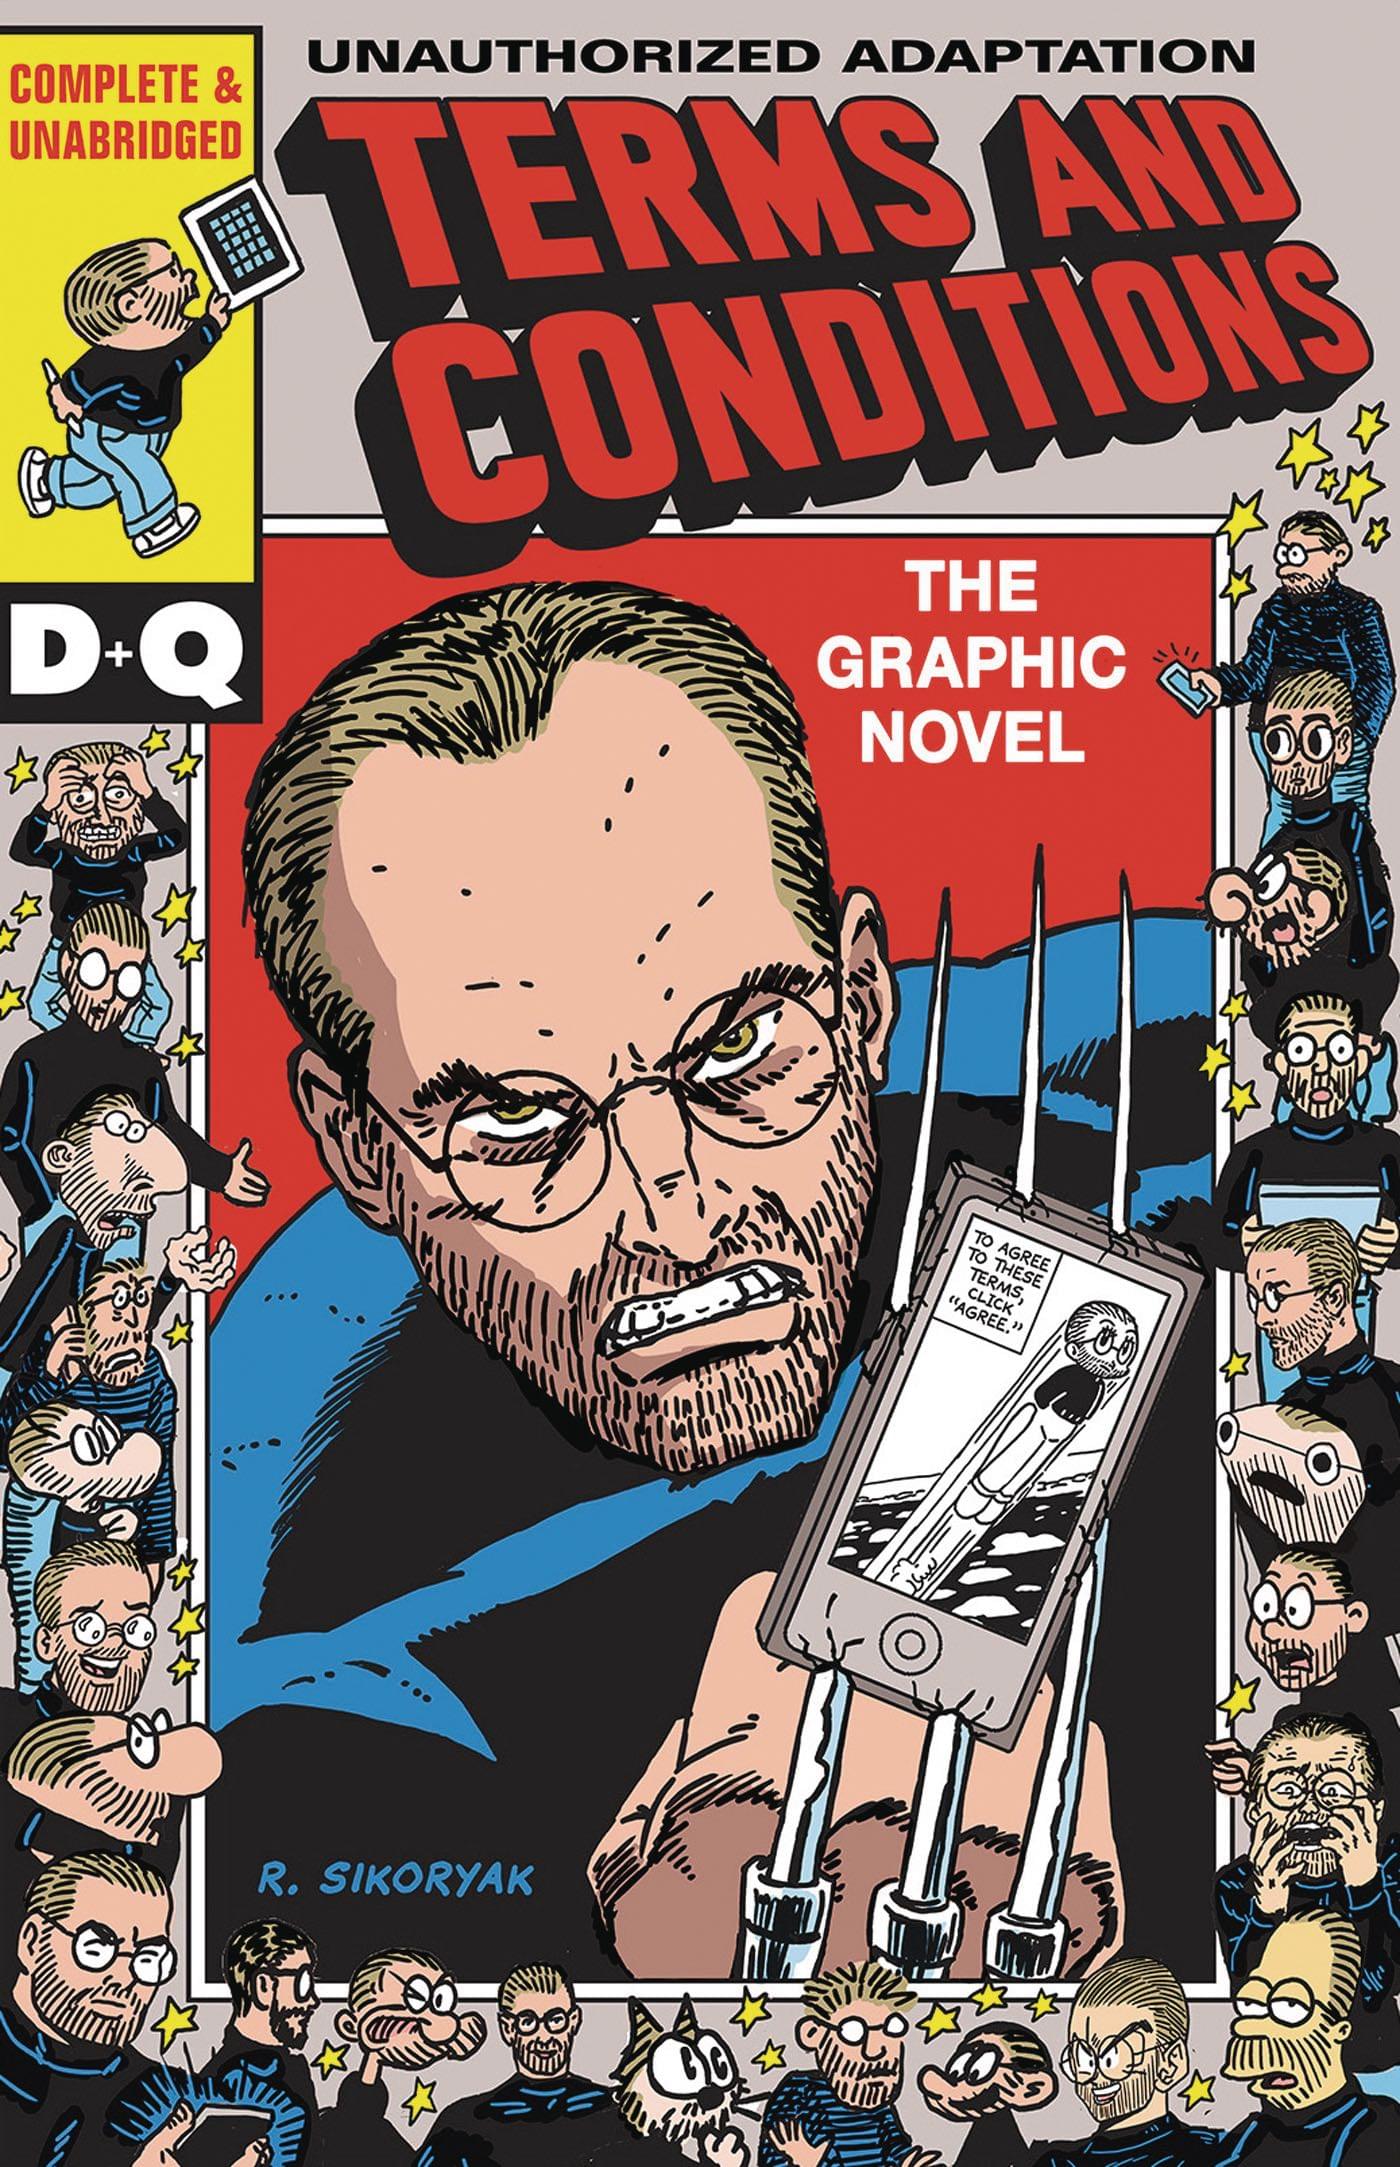 The cover of the Terms and Conditions graphic novel which is the iTunes Terms and Conditions document translated into a comic book